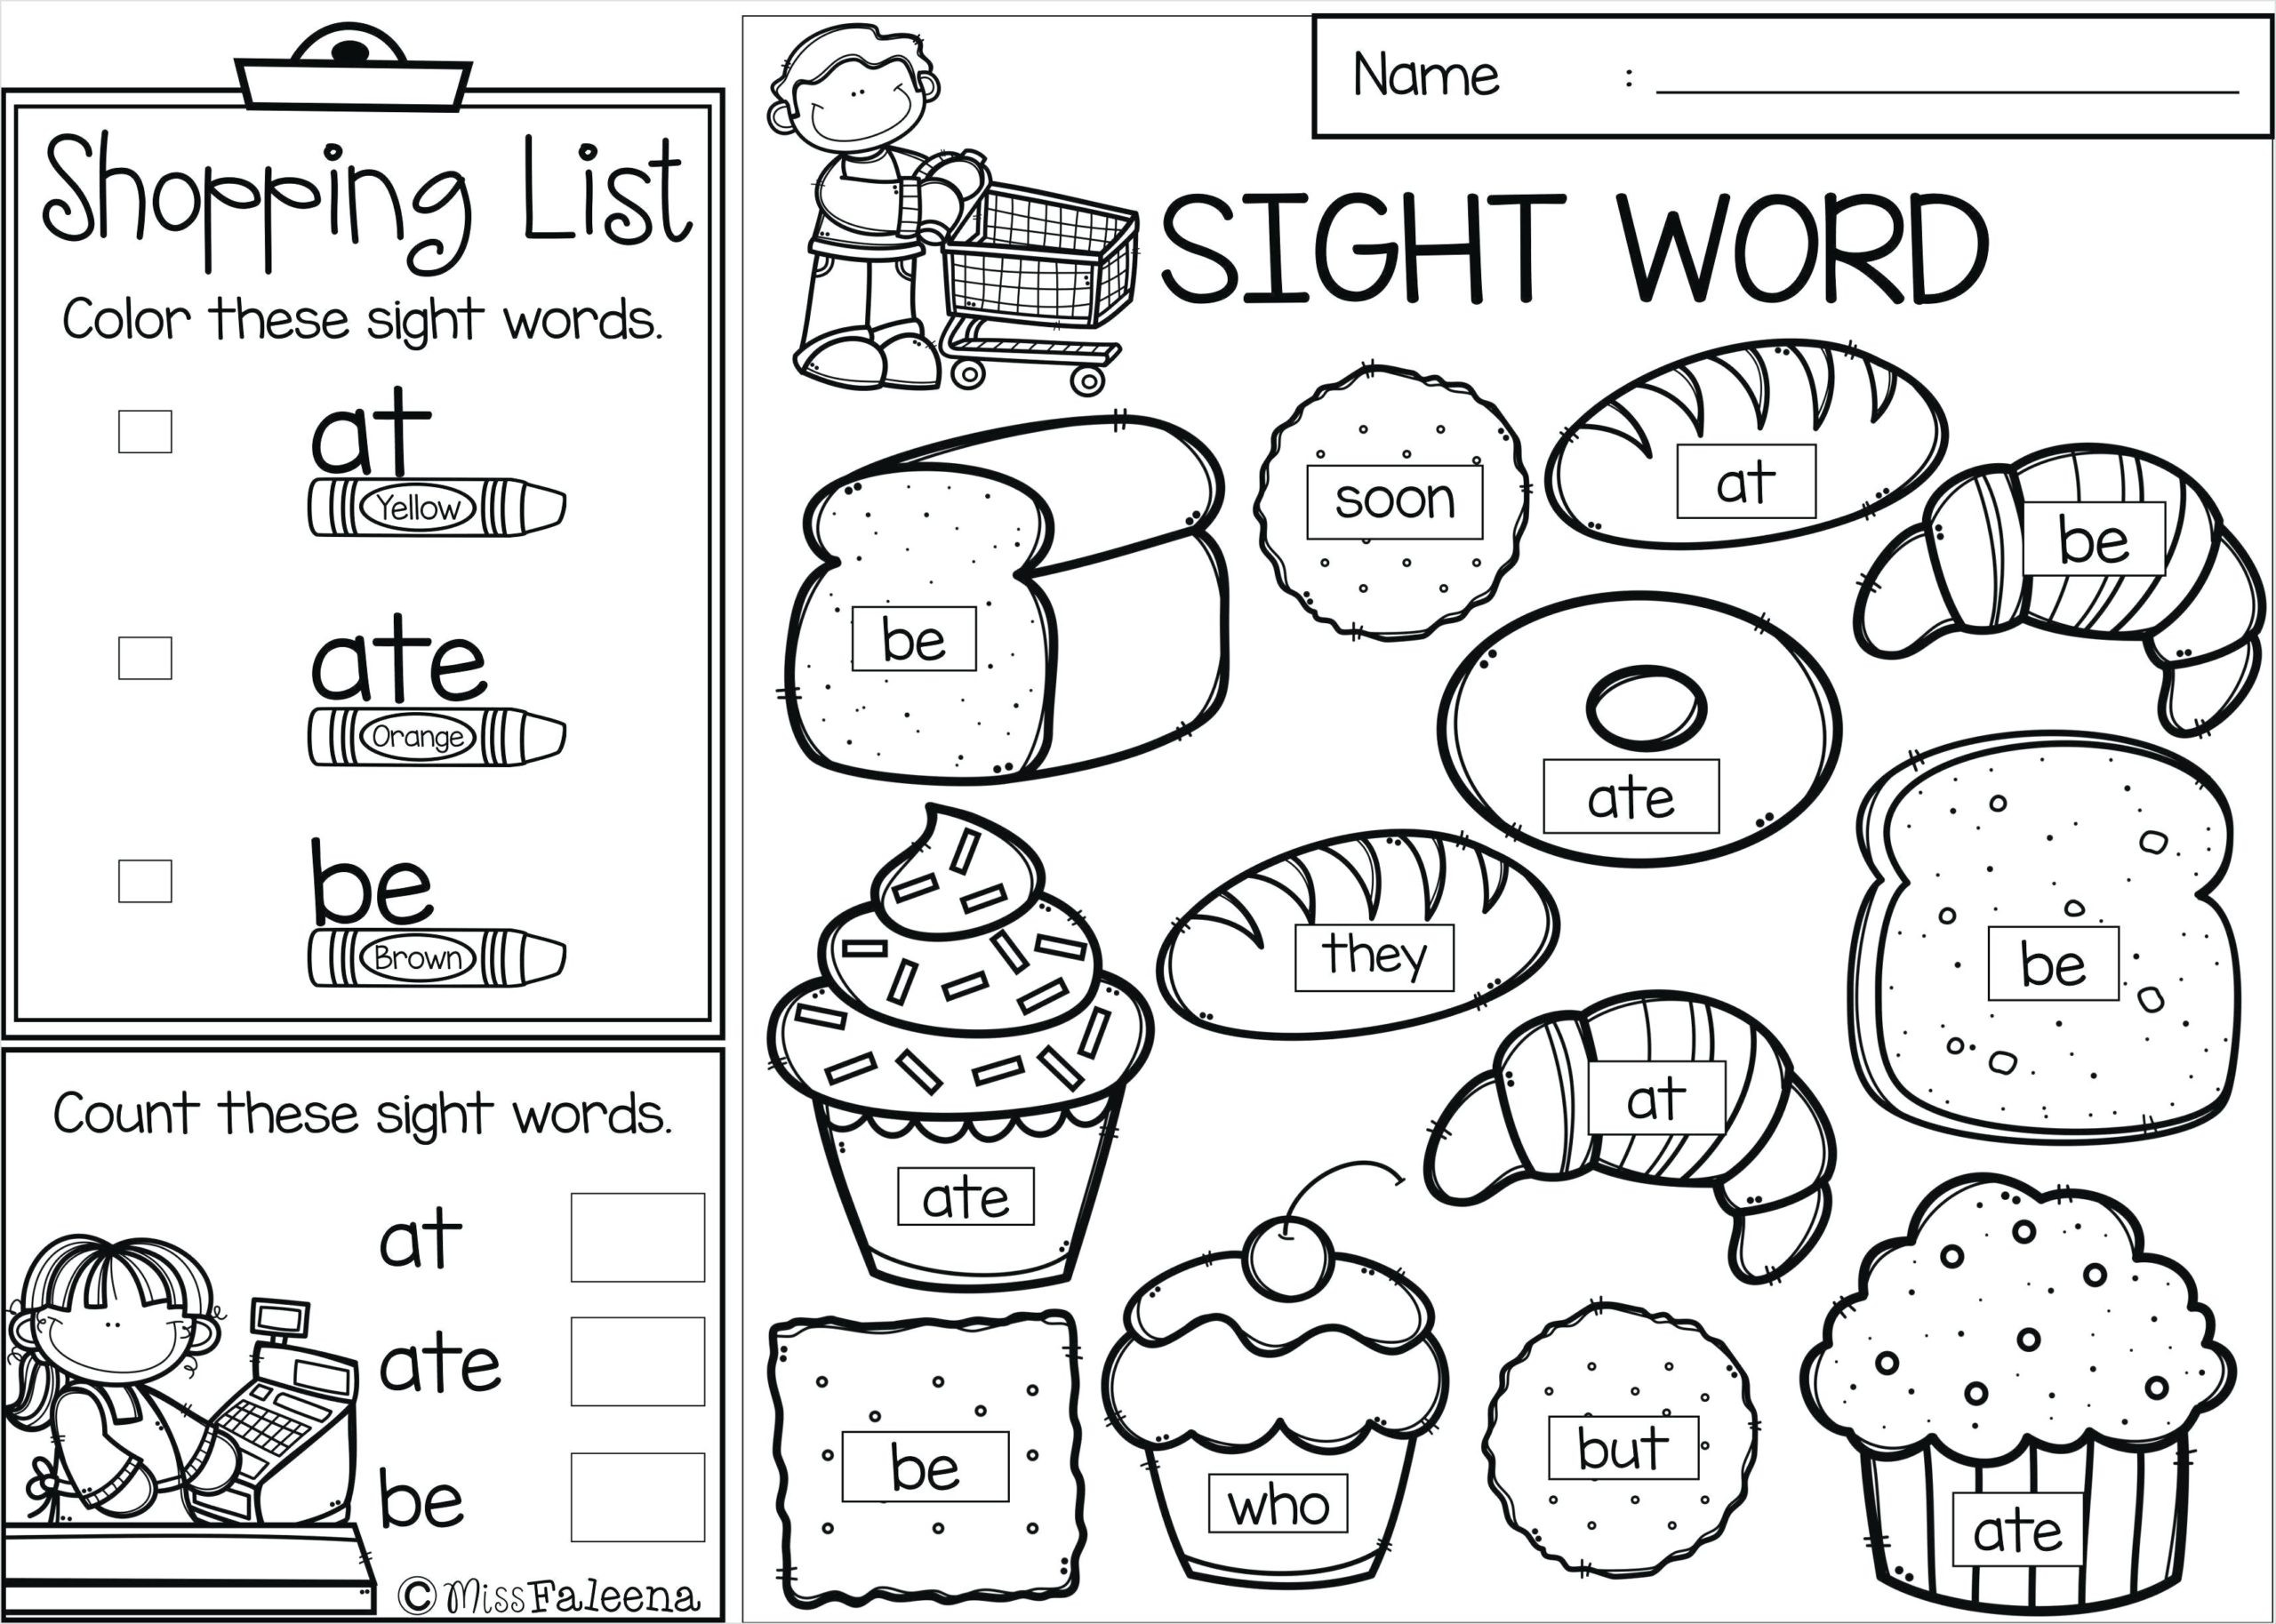 free worksheet for teachers printable shapes worksheets toddlers subtracting linear expressions reading scavenger to make math cute animal coloring sheets counting coins 2nd grade social scaled